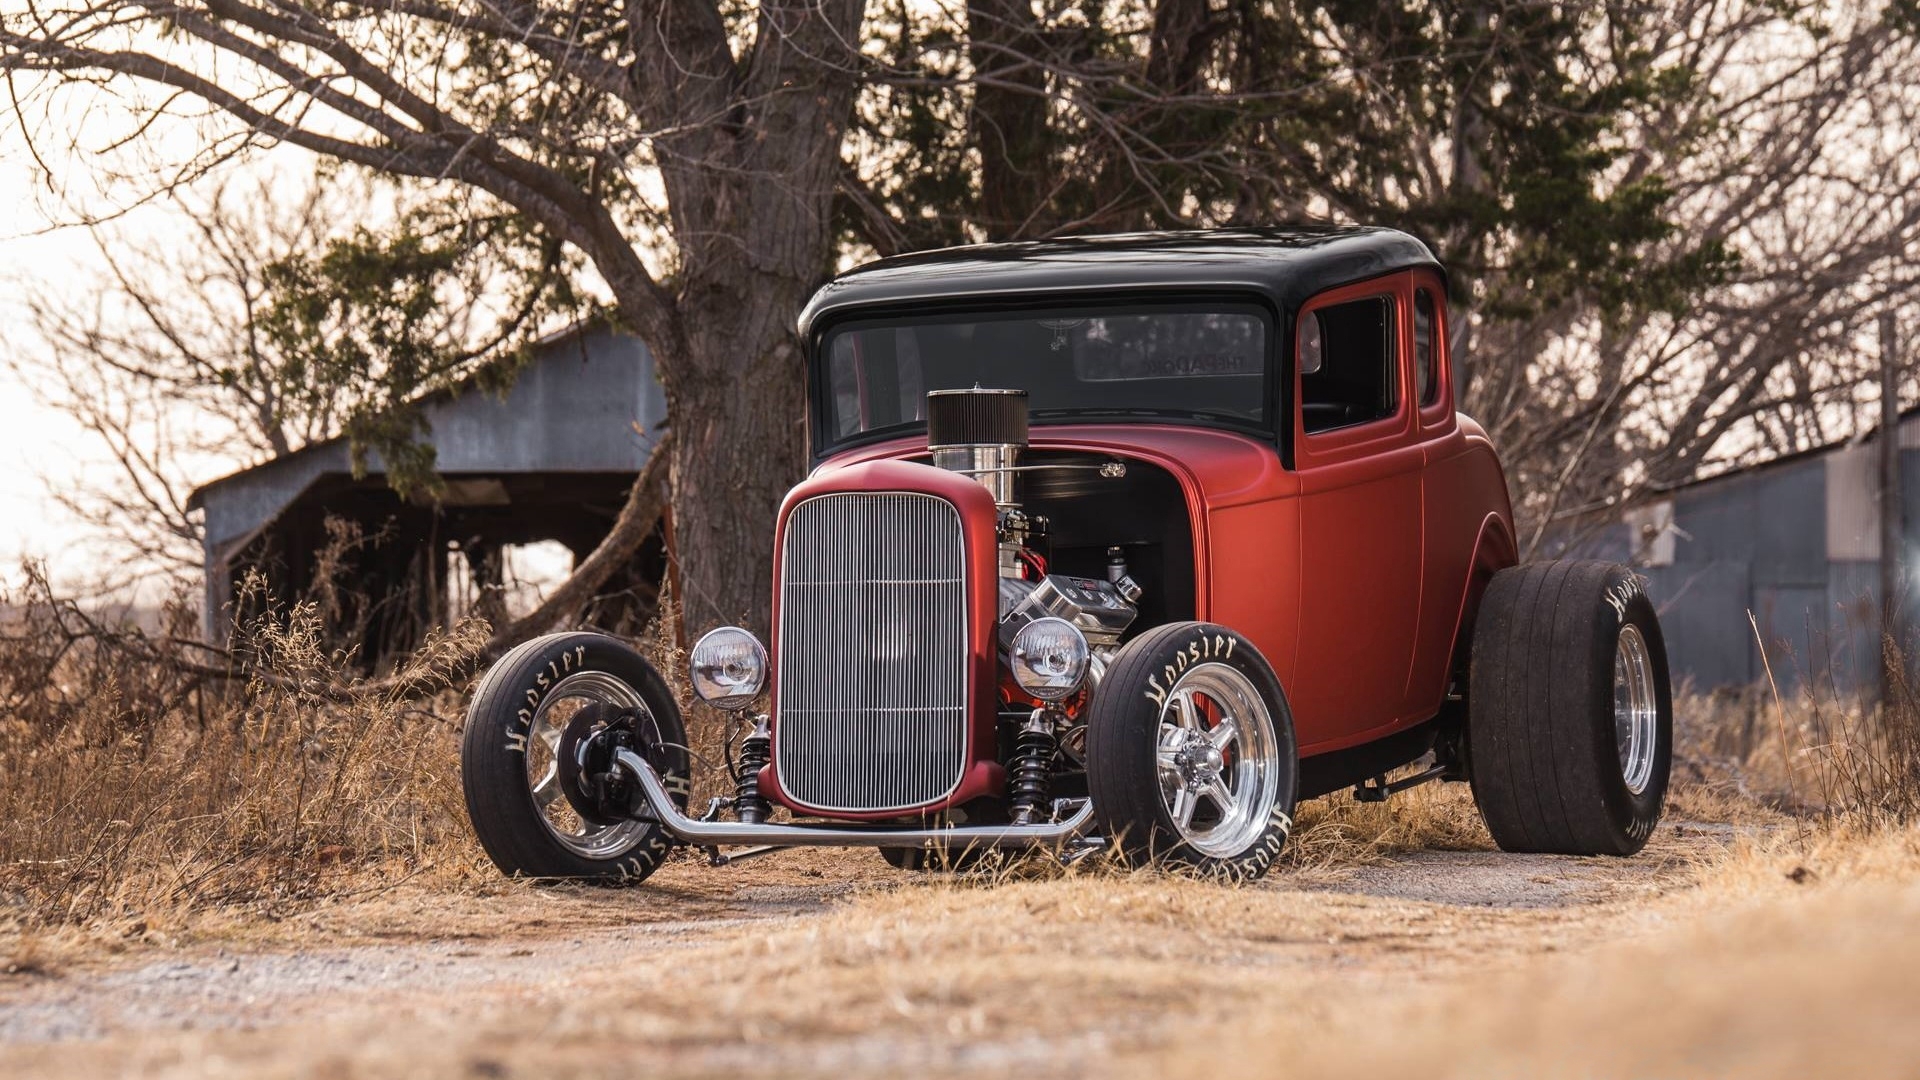 Hot rod hd wallpapers backgrounds